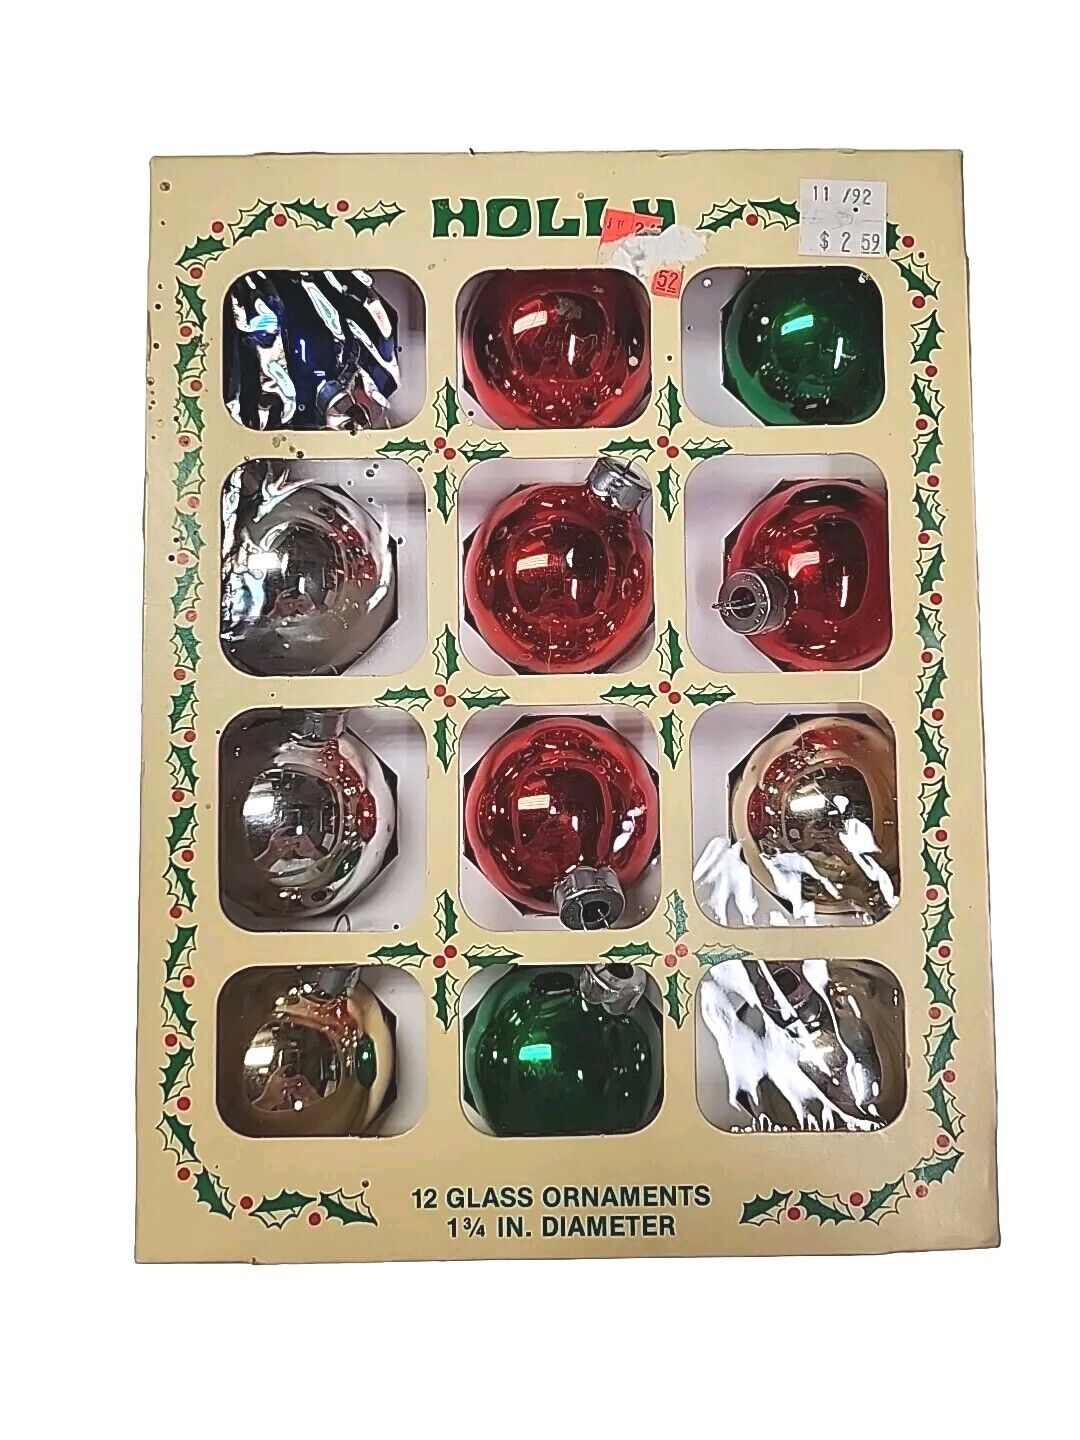 Vintage Holly Glass Christmas Ornaments Set of 12 in Original Vintage Box